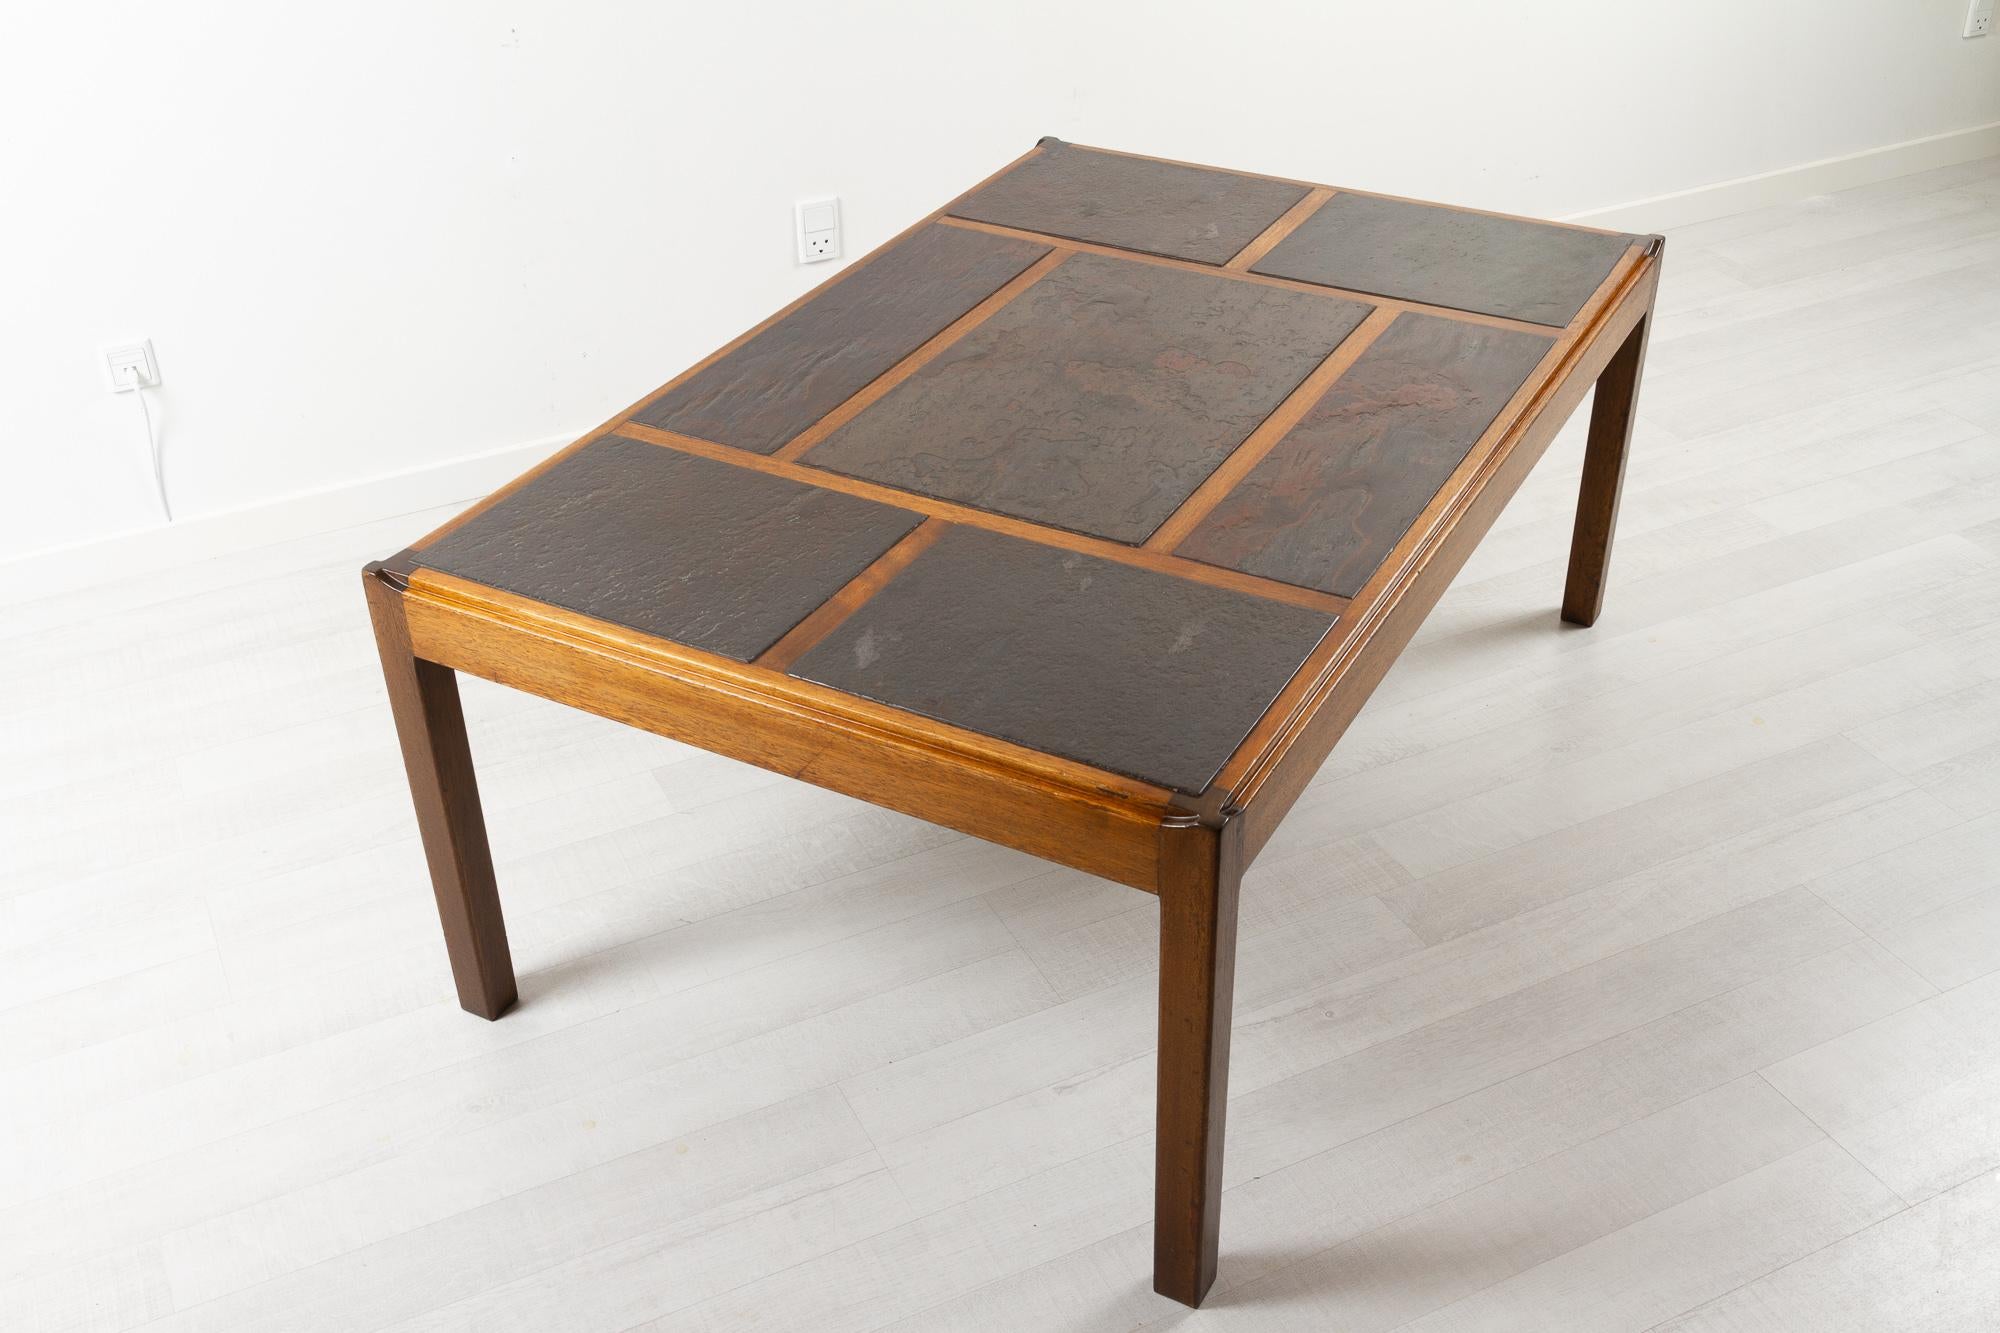 Vintage Danish slate and mahogany coffee table by Svend Langkilde 1970s
Large and heavy Danish Mid-Century Modern coffee table designed by Danish architect Svend Langkilde and made by his own company Langkilde Møbler in Denmark.
Rectangular table